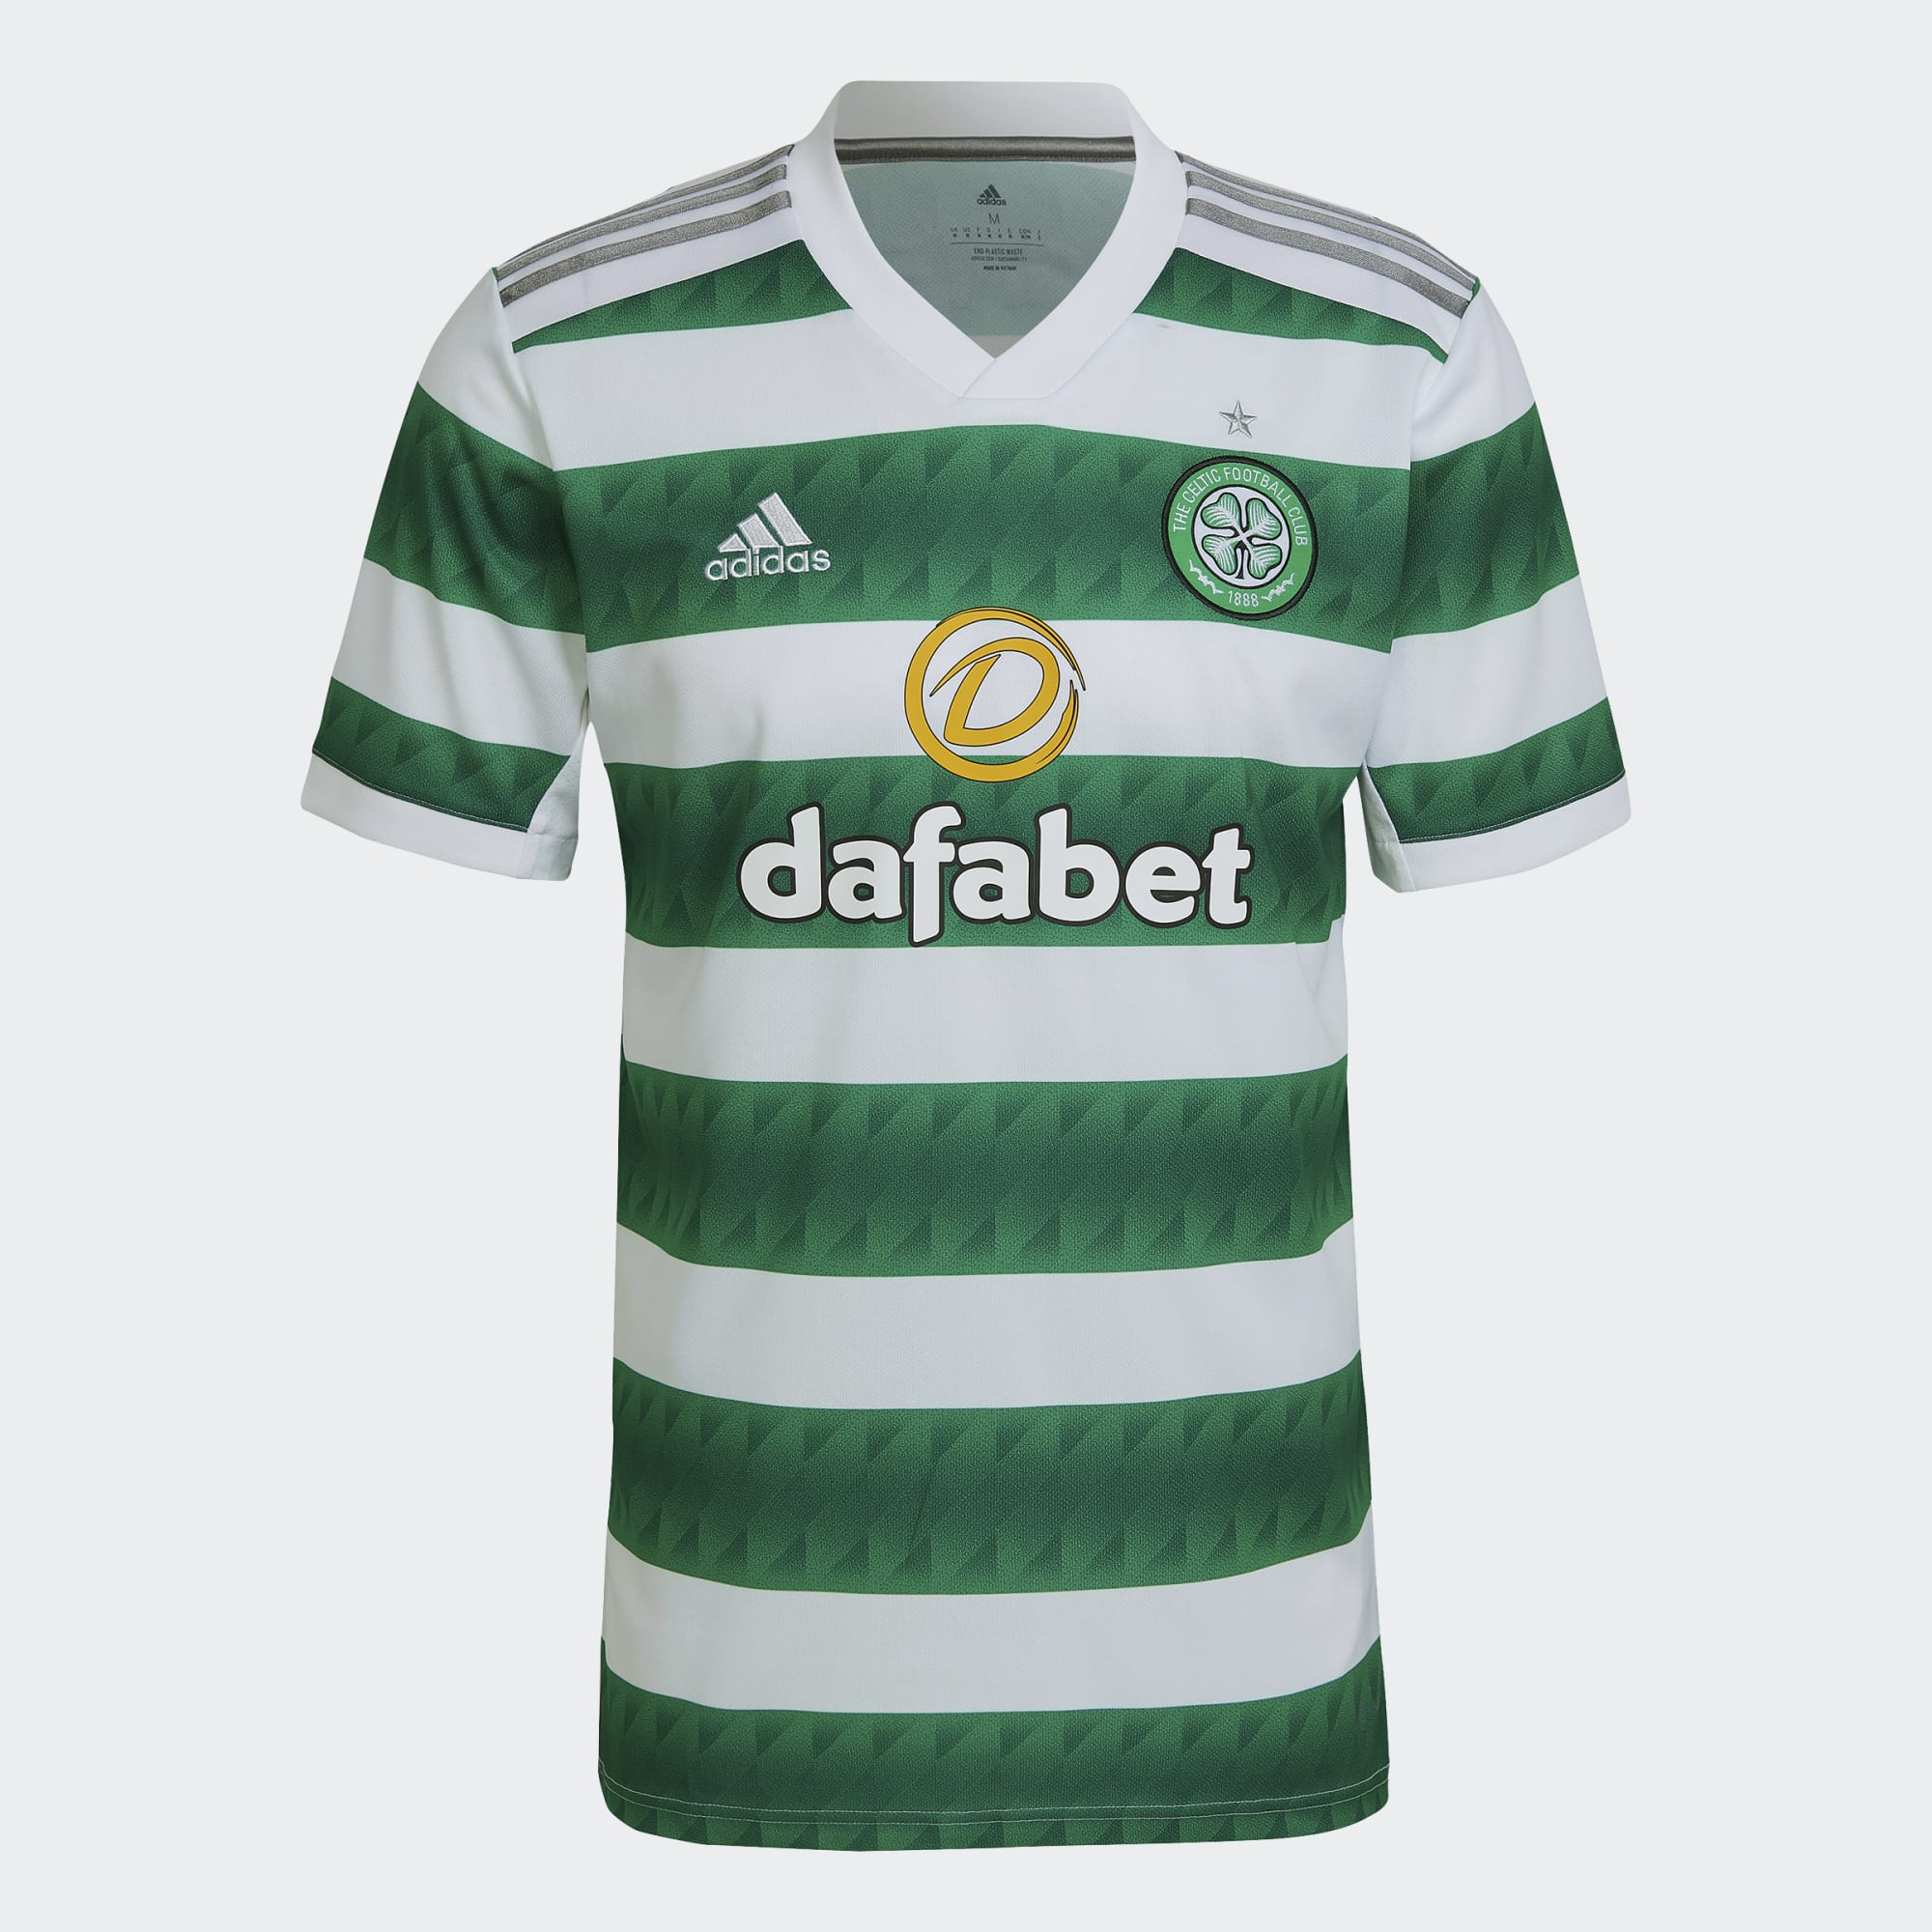 Football Republic - The Celtic Mens 2021/22 Third Shirt is a crisp, clean  white jersey with pink and green vertical pinstripes, a dark green ribbed  v-neck collar, and shoulder three-stripe design. The